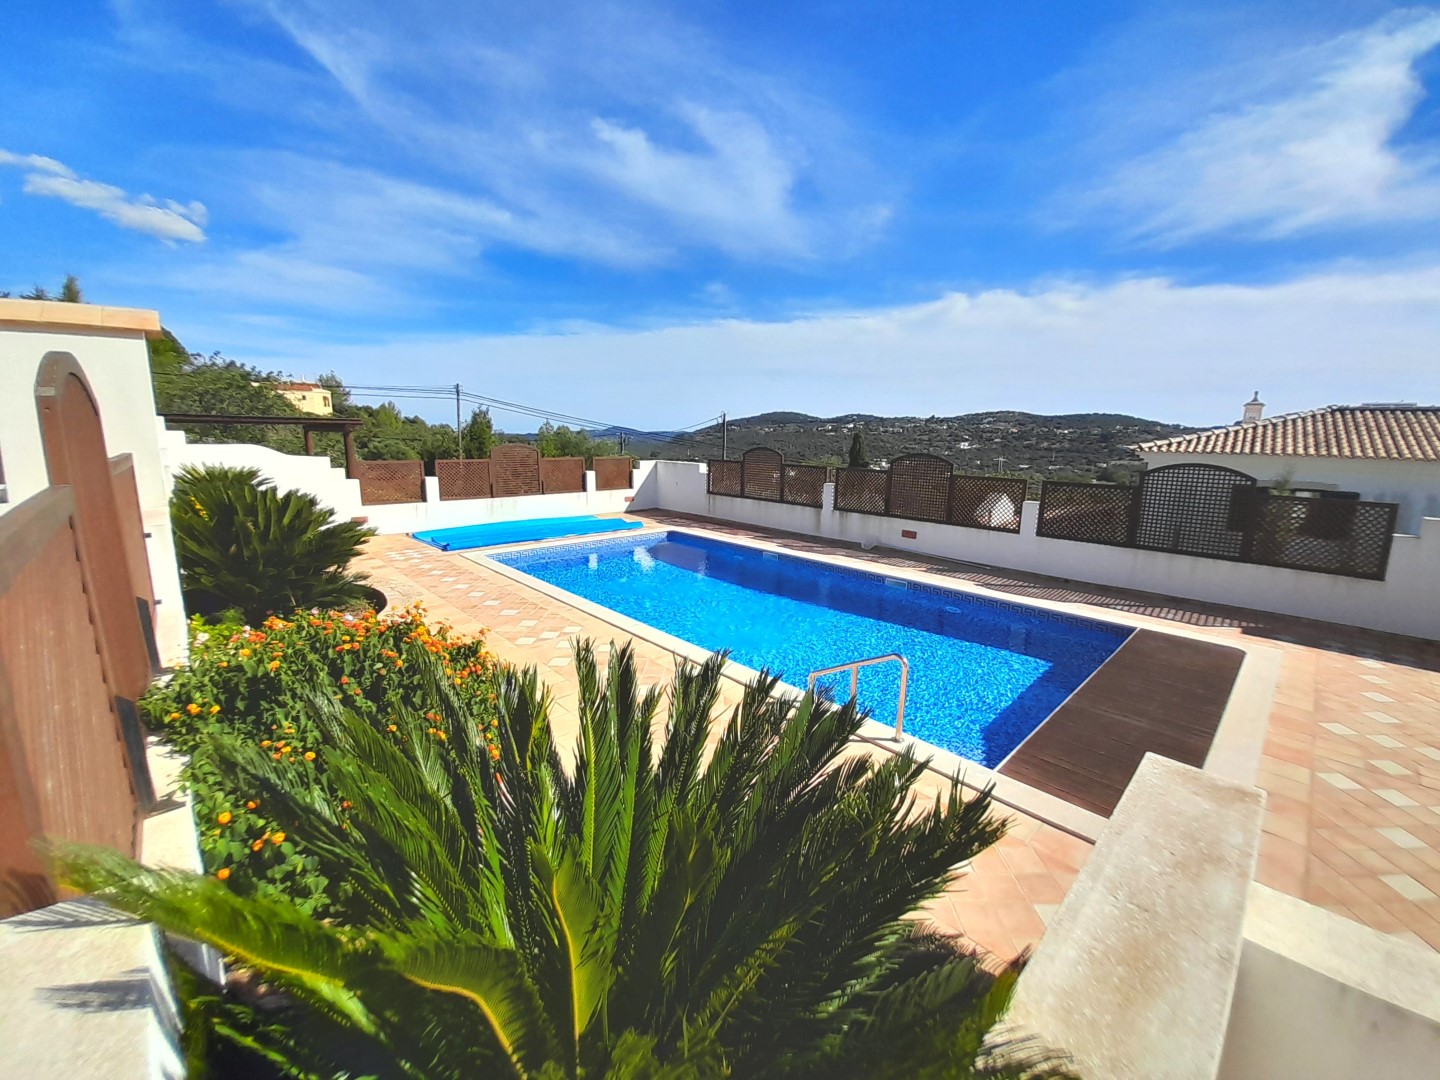 New Listing! For Sale V5 Villa, turnkey, built to high standards, Sales Price €1.150.000.  Beautiful Villa w/Swimming Pool and South Facing Magnificent Views – Country Side Living, Between Loulé and São Brás, Algarve – Portugal